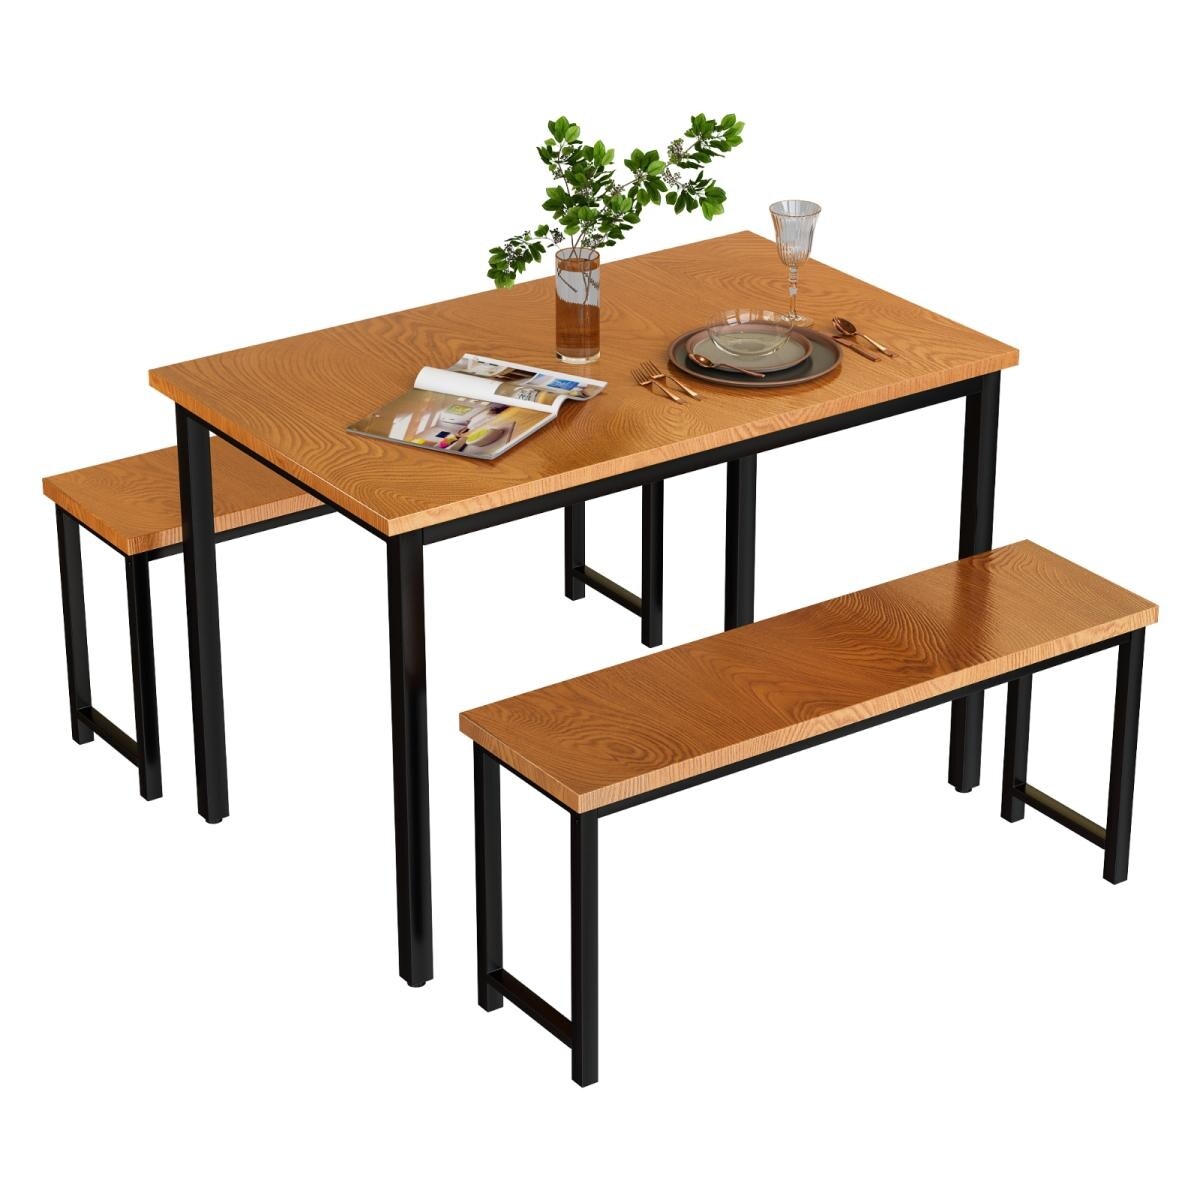 Eureka Industrial 3-piece Dining Set, Modern Kitchen Dining Table with Two Benches for Home, Kitchen, Dining Room, Bar